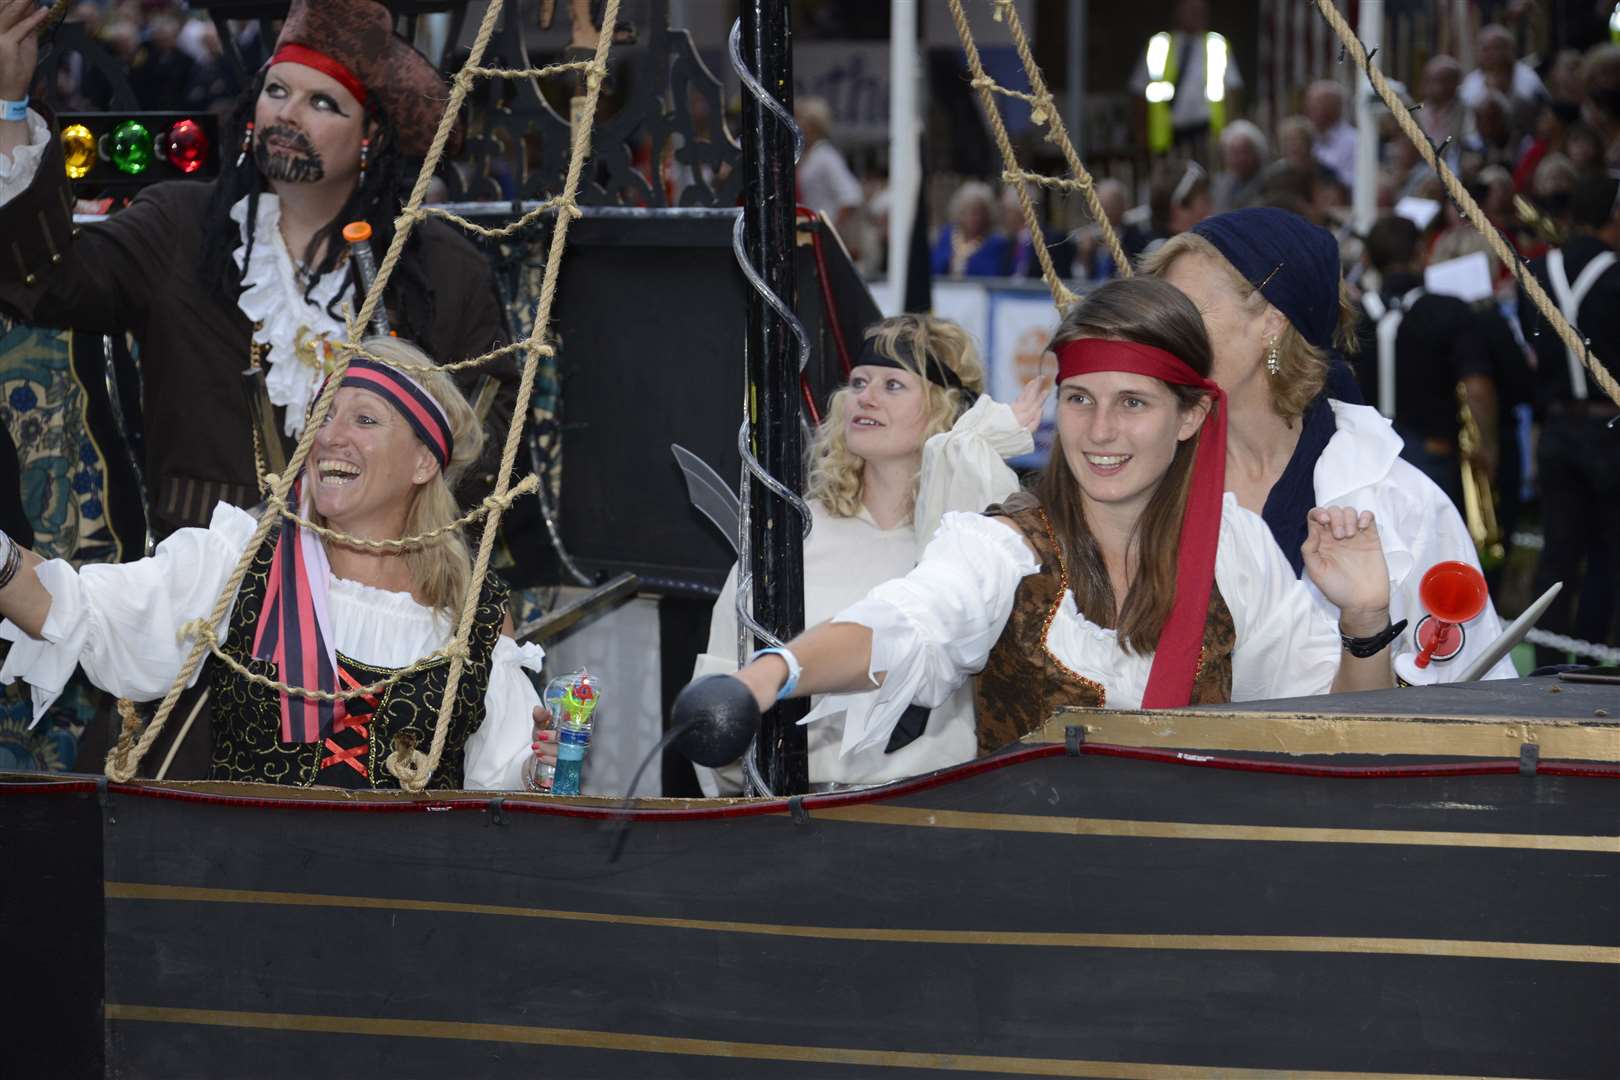 Folkestone Rowing Club created their own Black Pearl manned by Captain Jack Sparrow from Pirates of the Caribbean